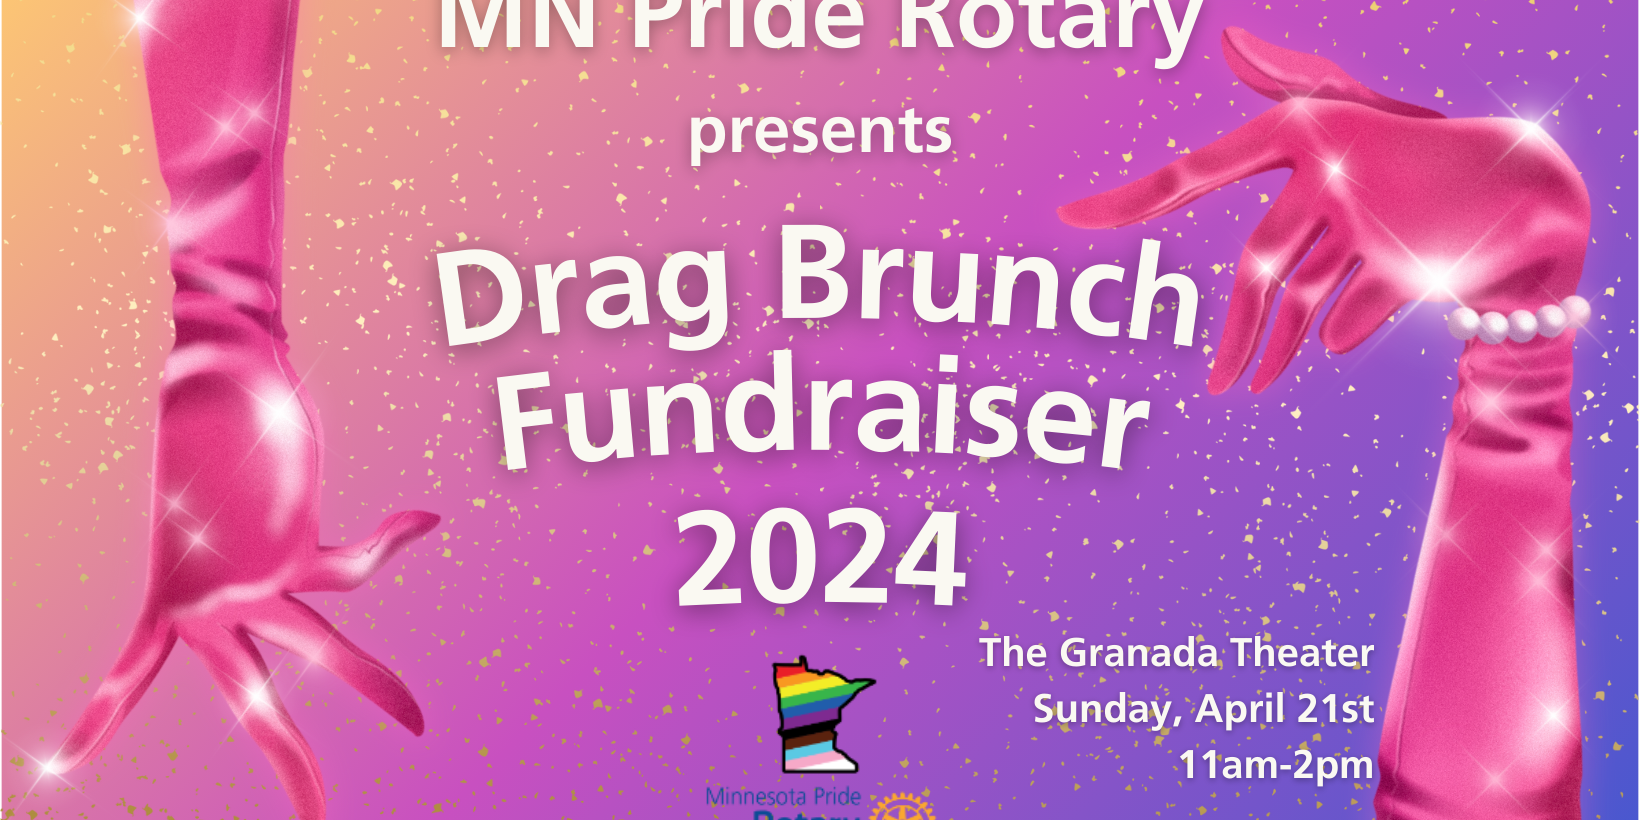 MN Pride Rotary's Drag Brunch Fundraiser 2024! (21+) promotional image